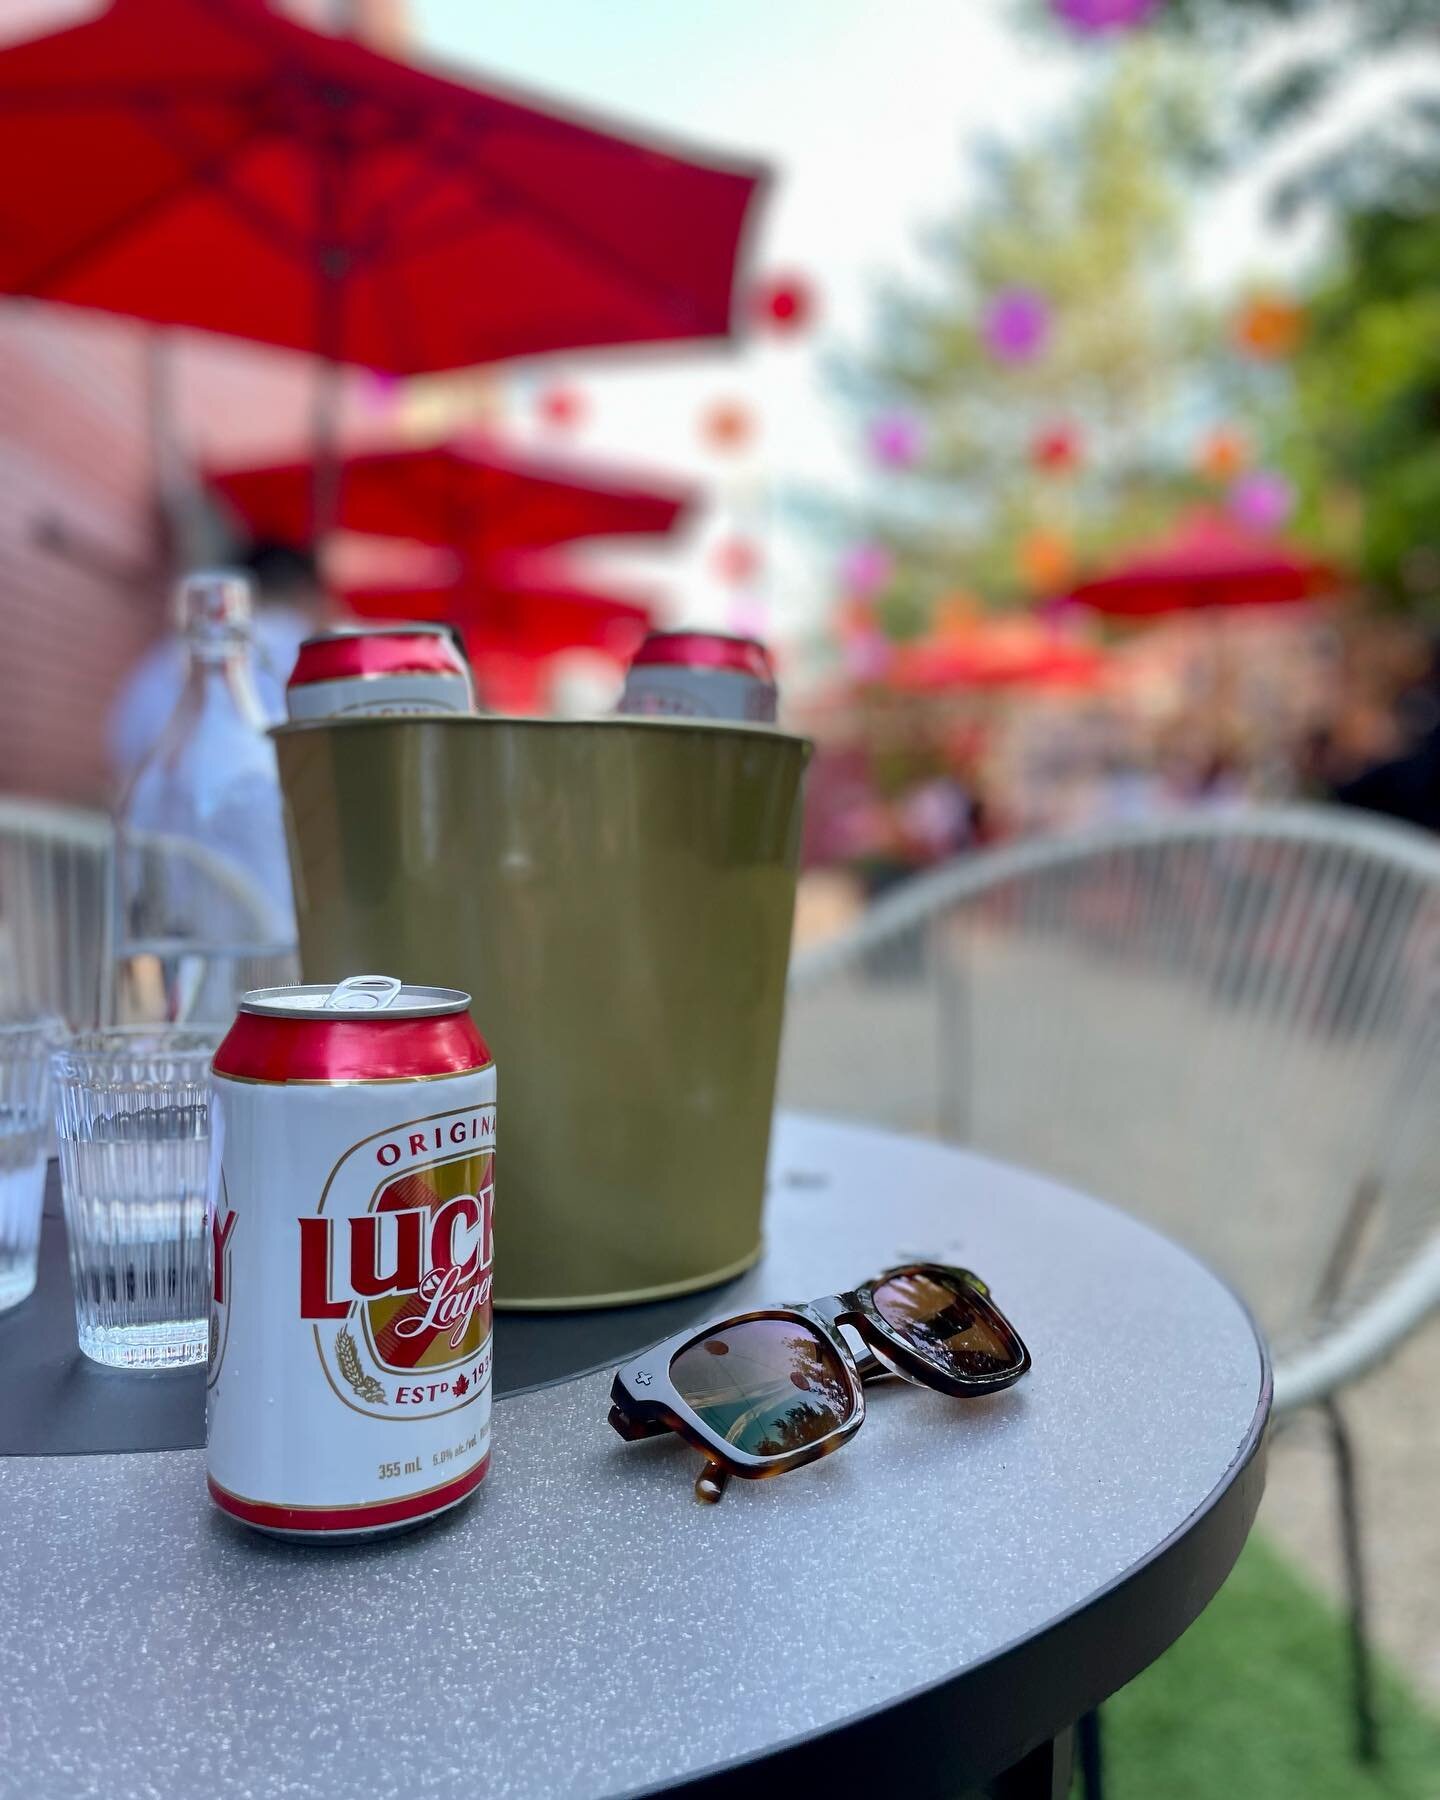 Patio season is upon us. Keep the beers cold and your eyes Happy with @spyoptic Happy Lens.